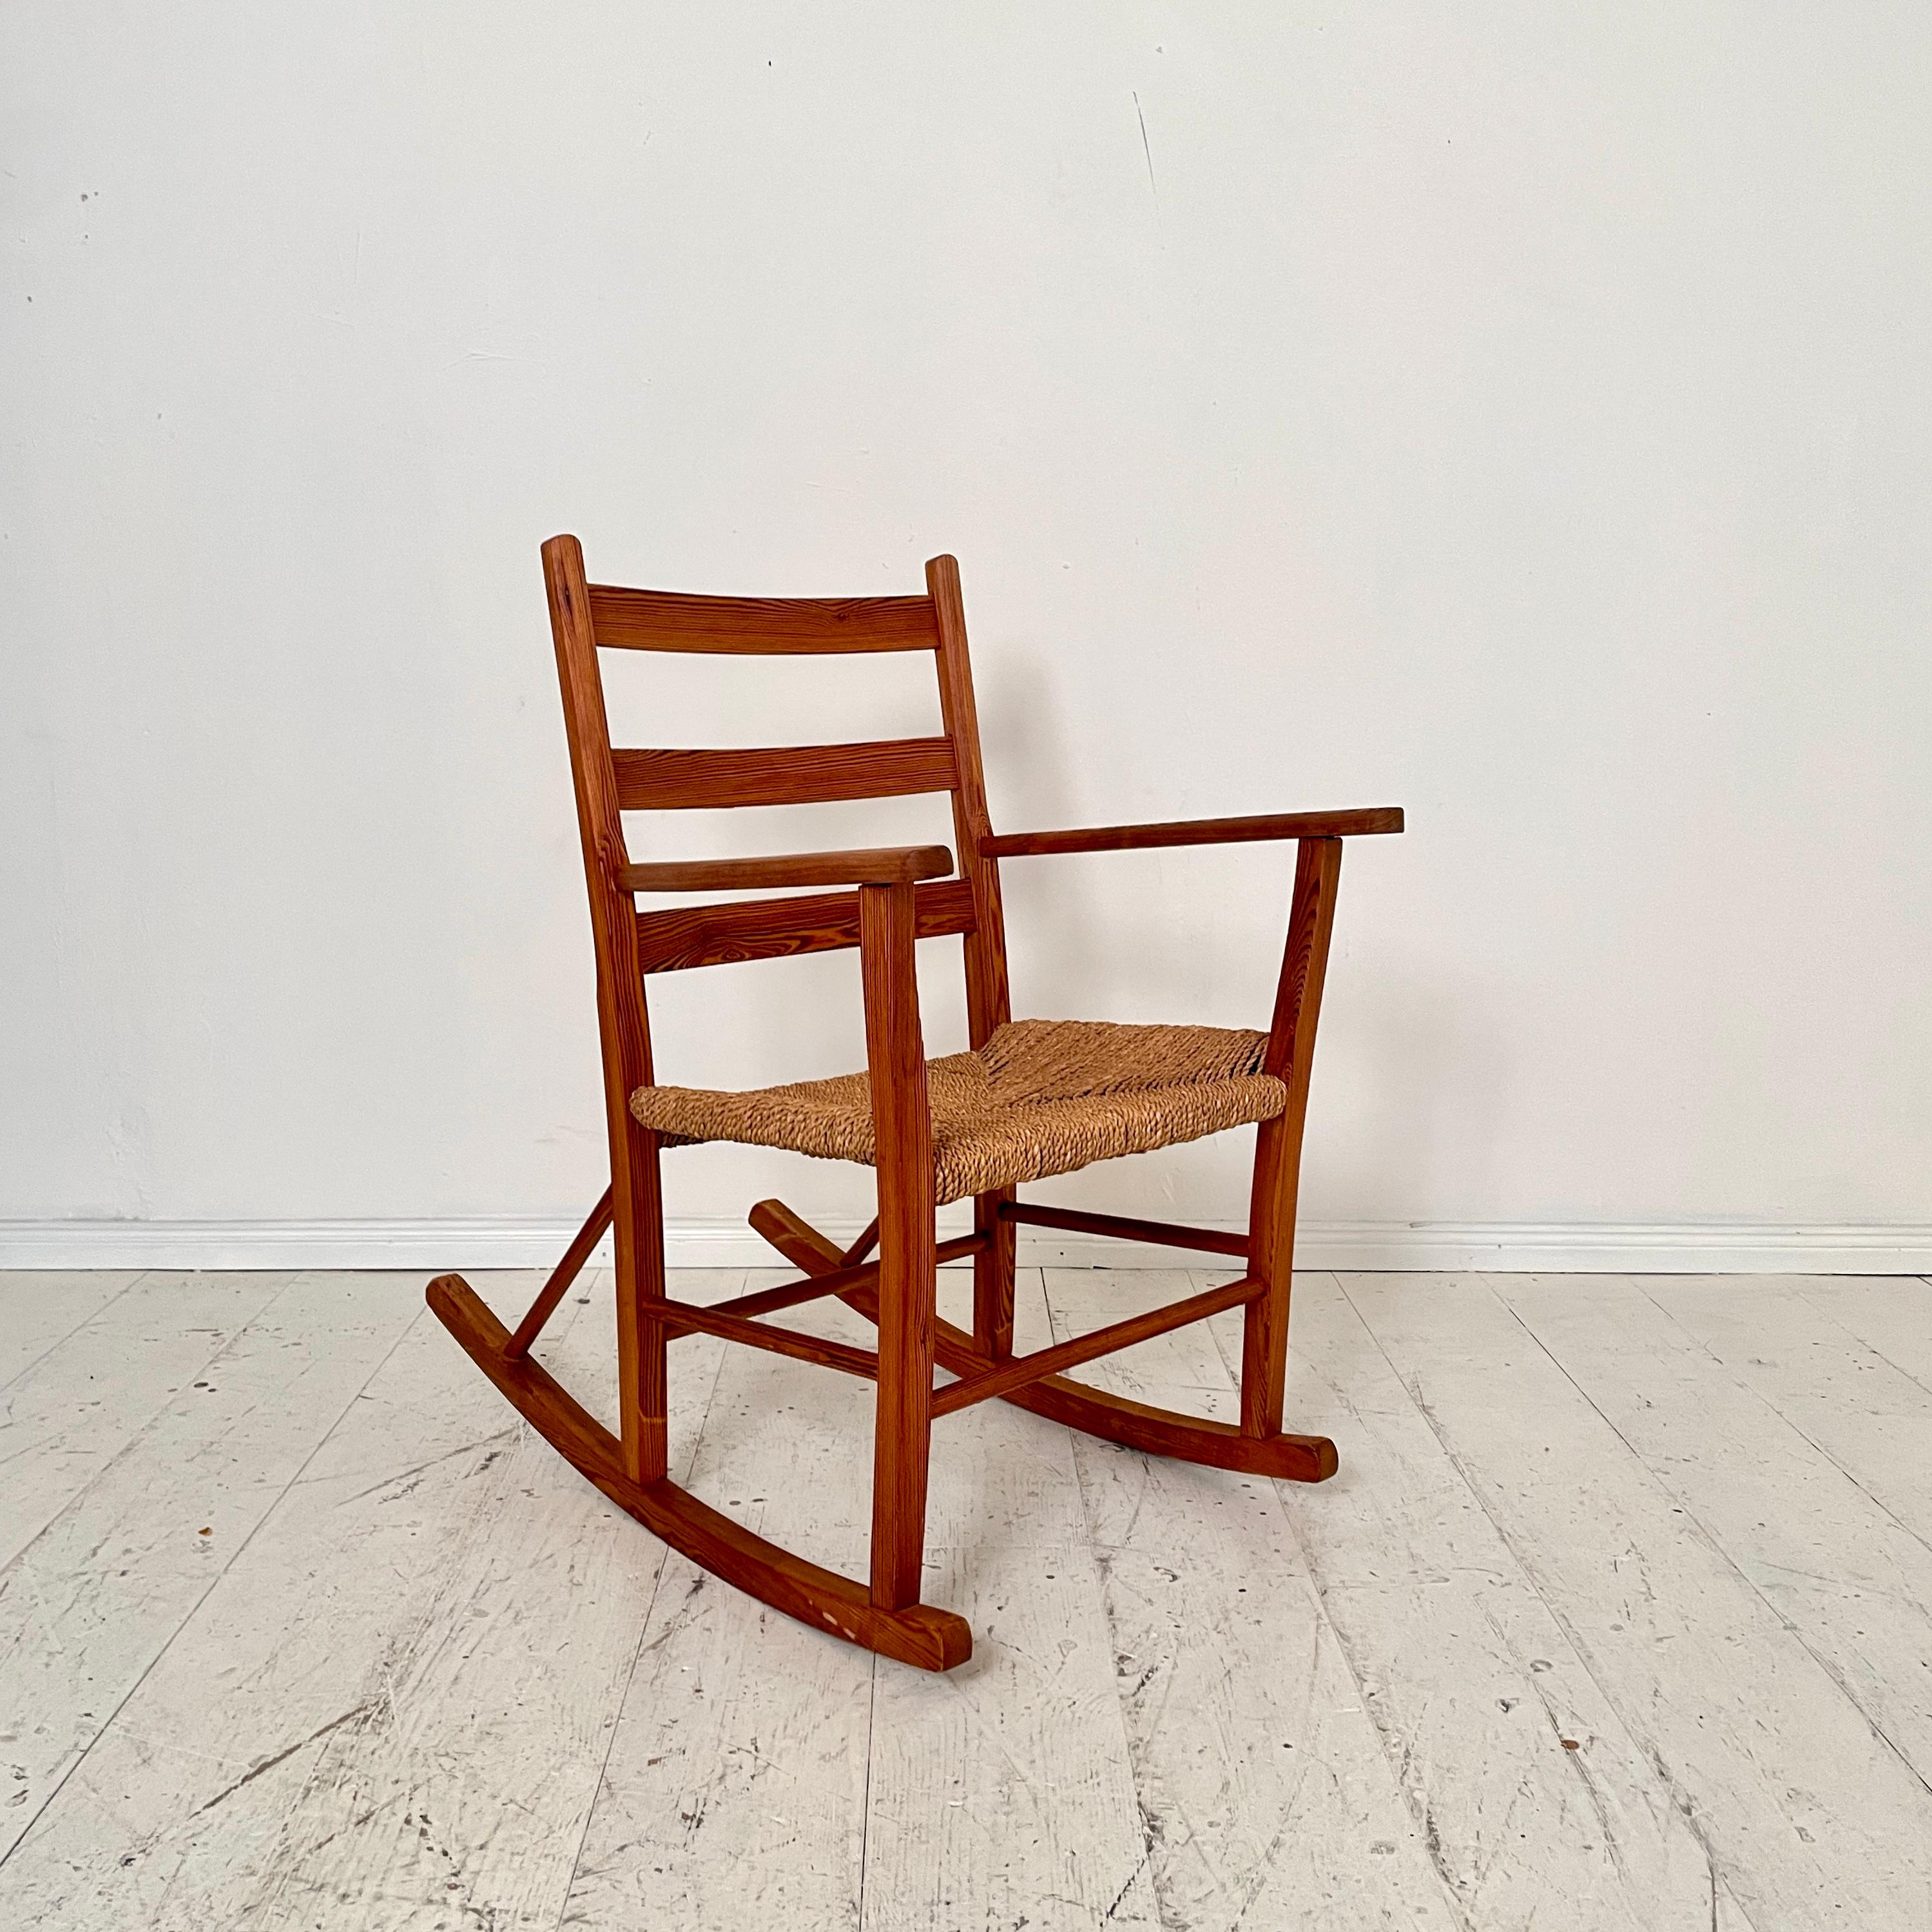 Norwegian Rocking Chair by Aksel Hansson in Pine, 1930 For Sale 6